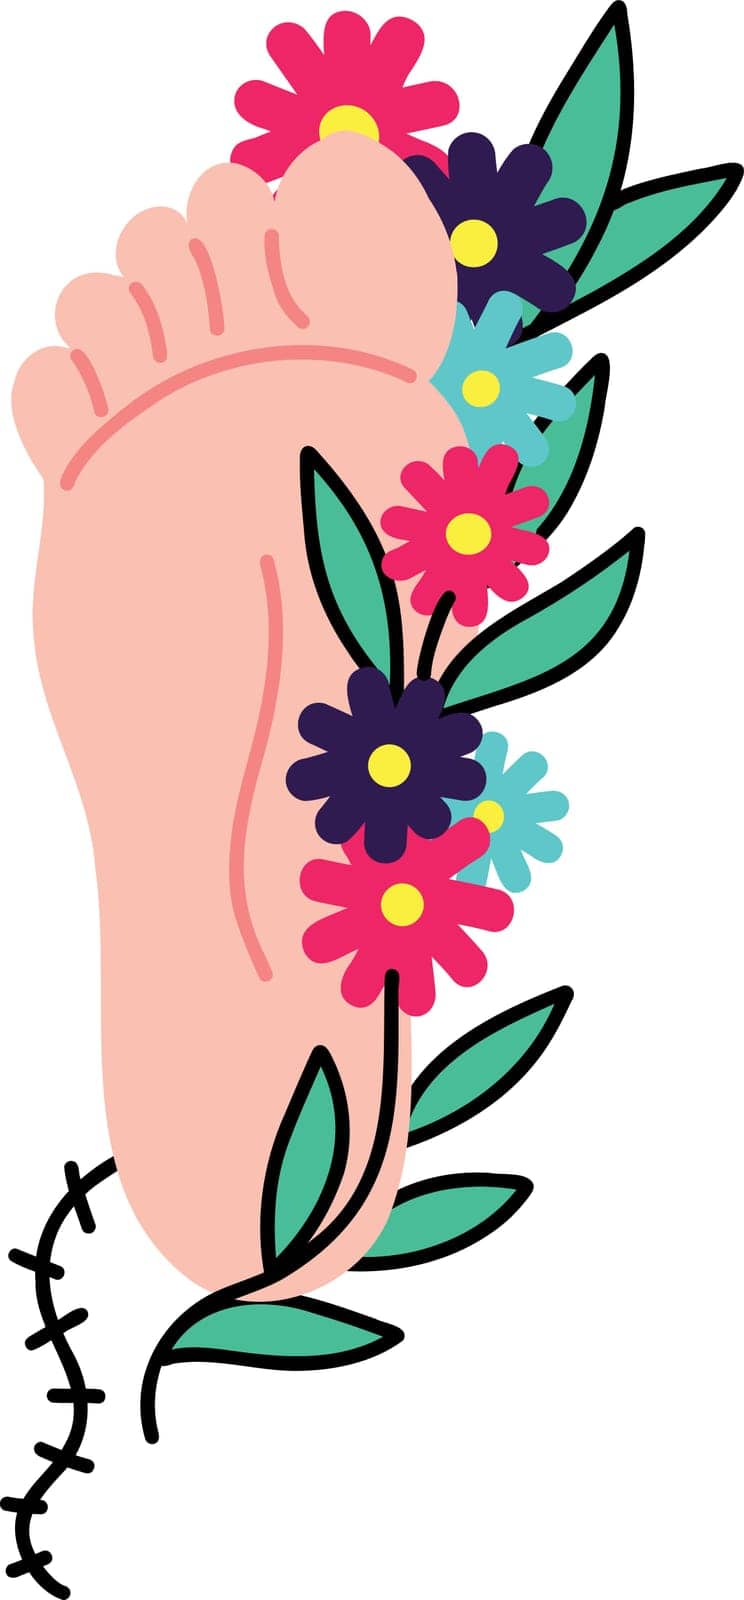 Foot and flowers vector illustration in doodle style